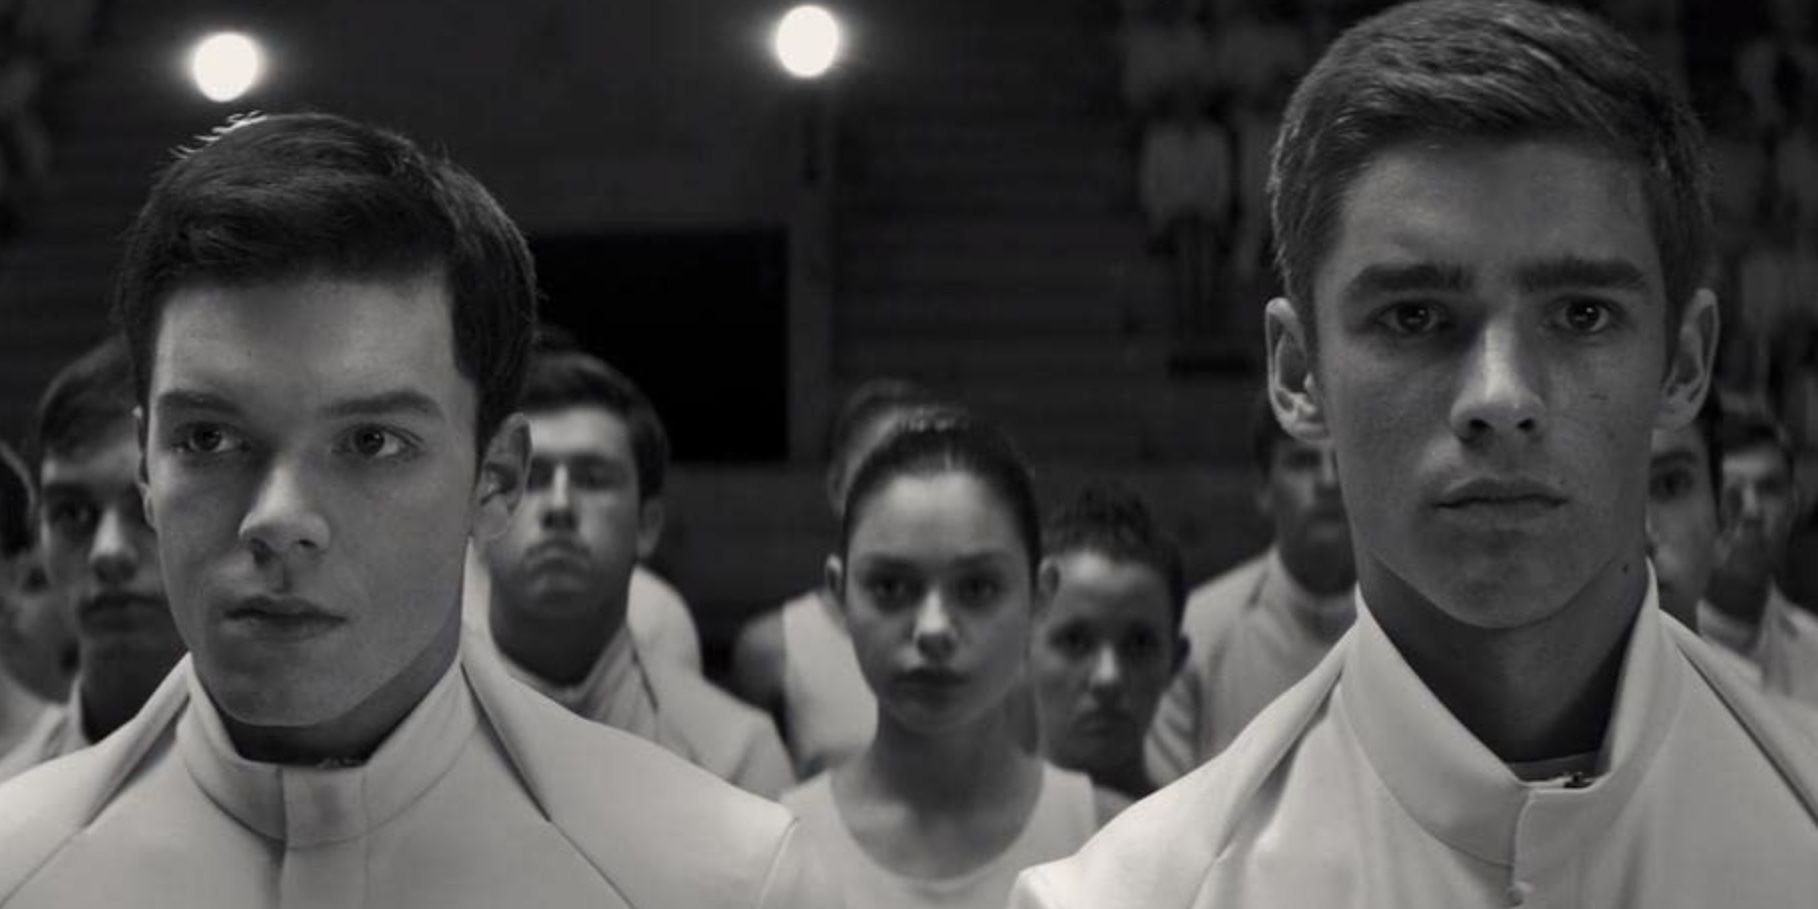 Cameron Monaghan, Odeya Rush and Brenton Thwaites in 'The Giver'